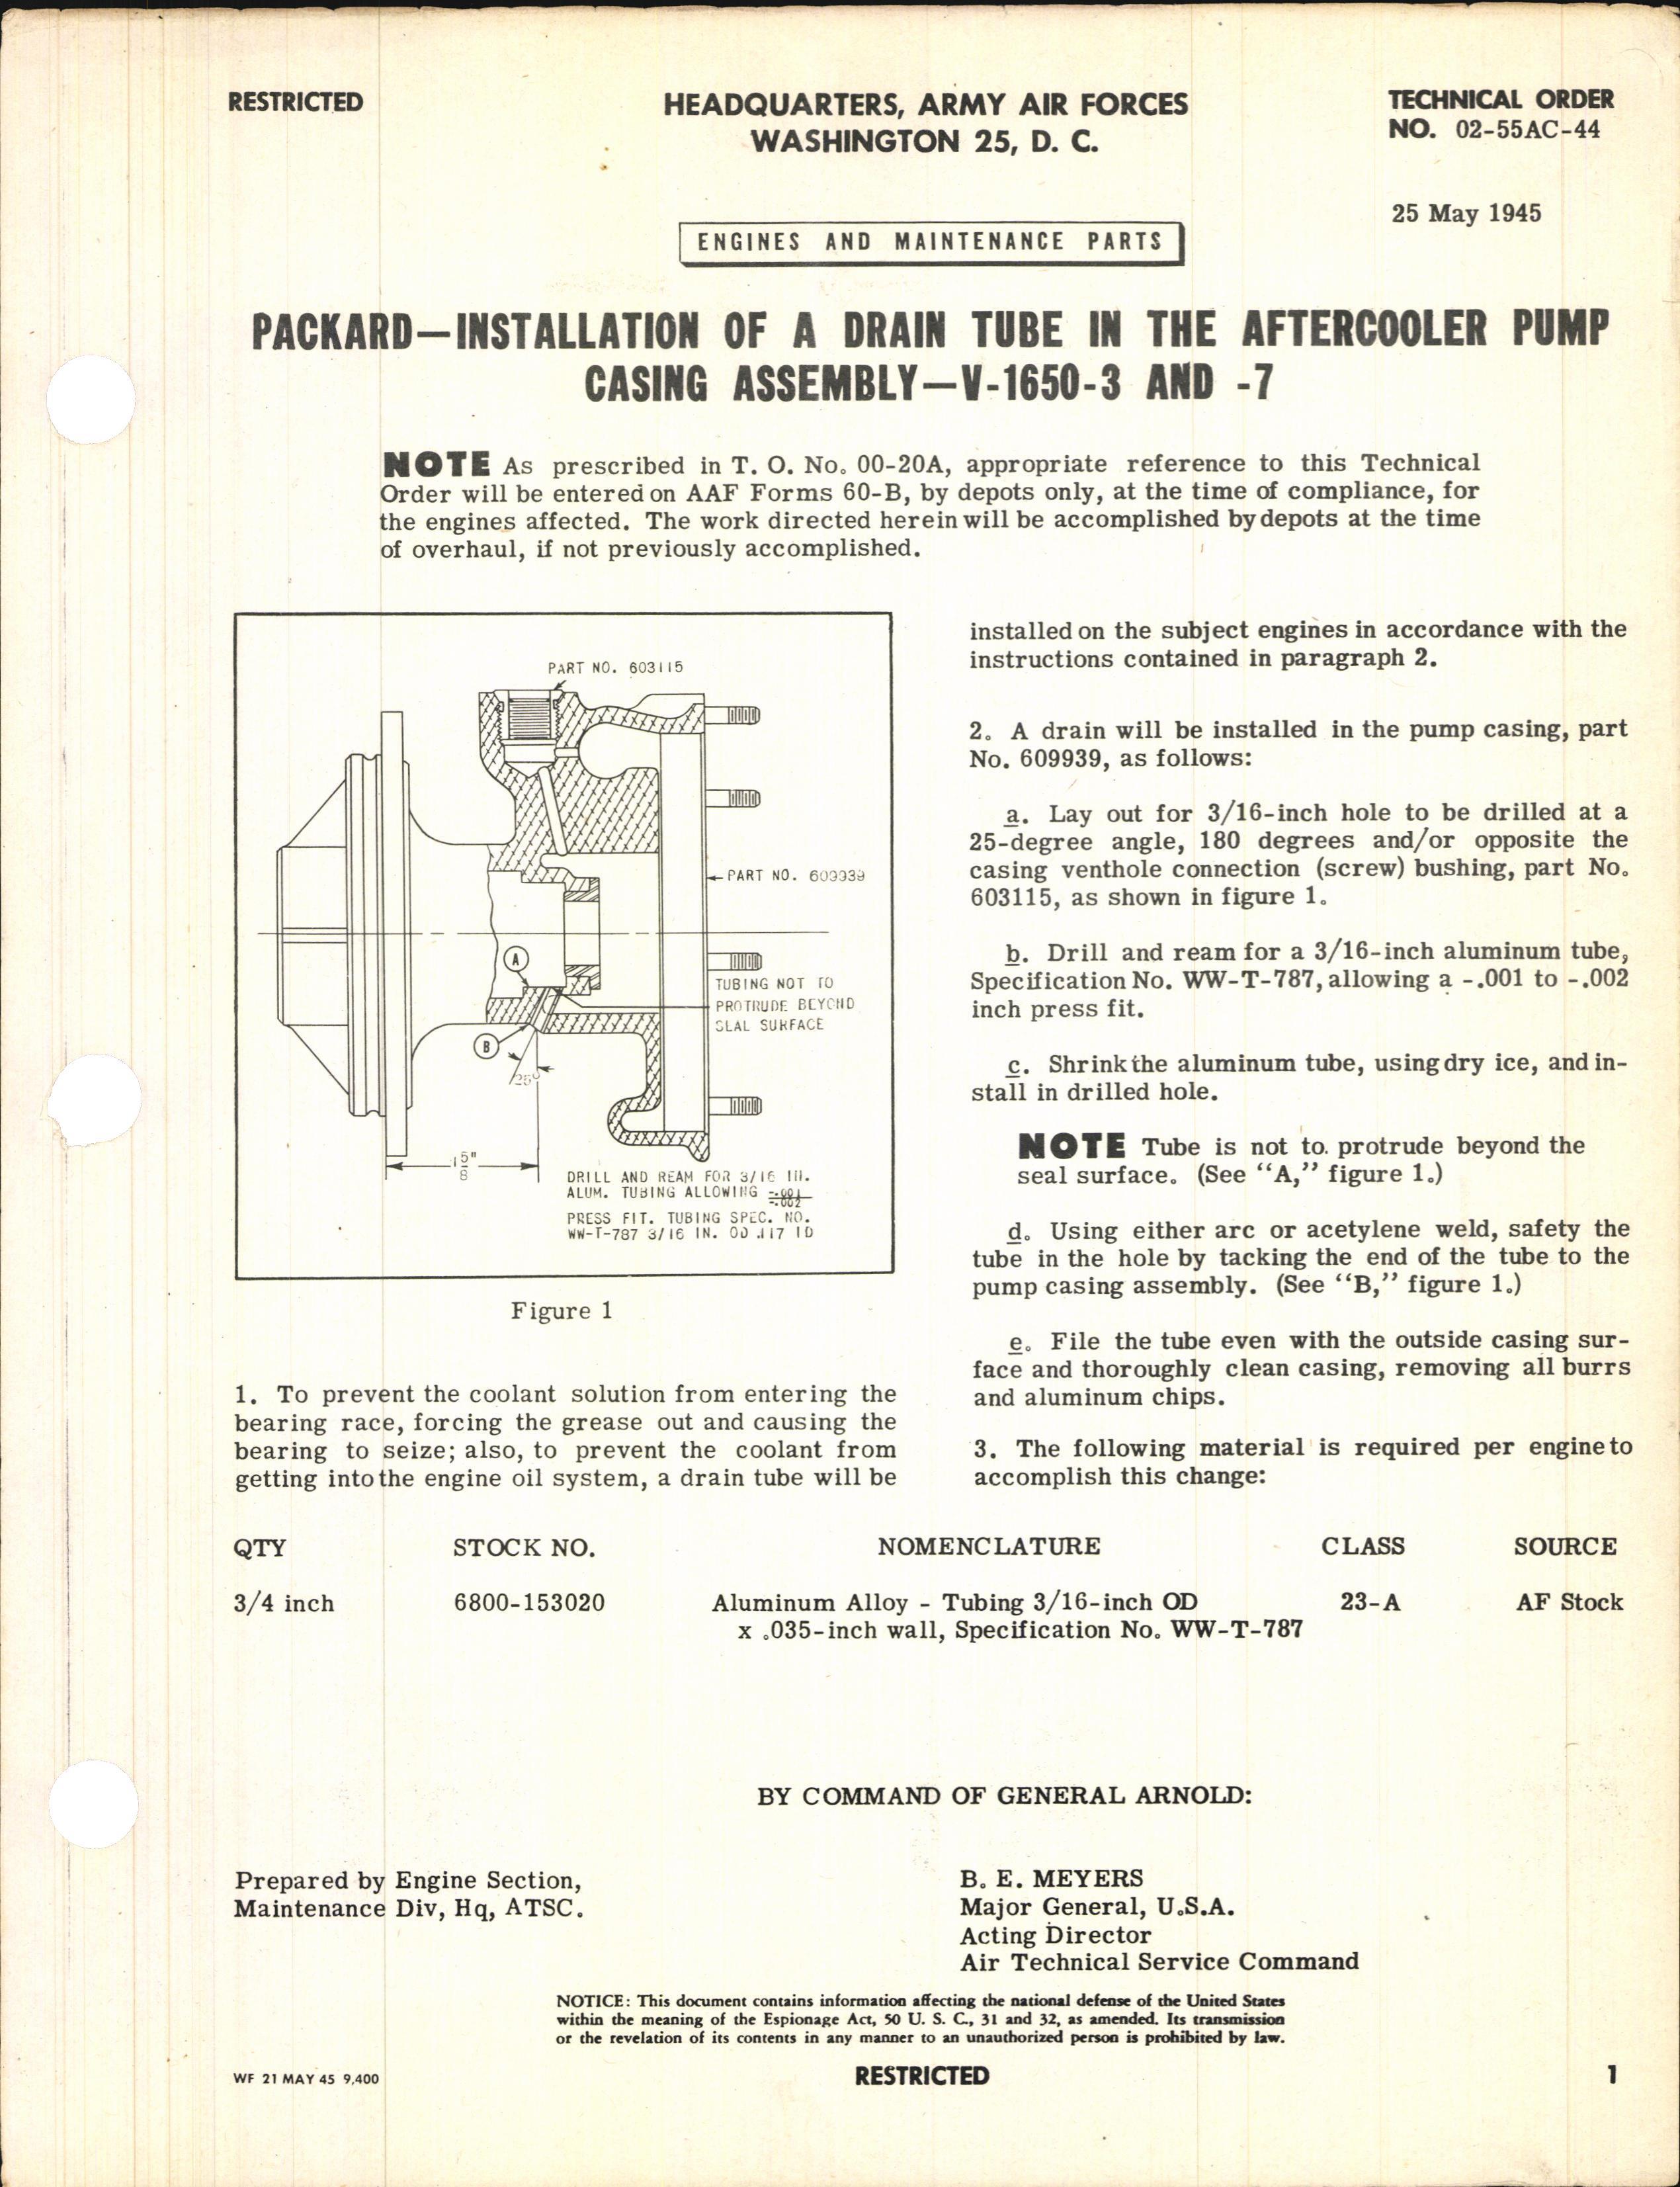 Sample page 1 from AirCorps Library document: Installation of a Drain Tube in the Aftercooler Pump Casing Assembly for V-1650-3 and -7